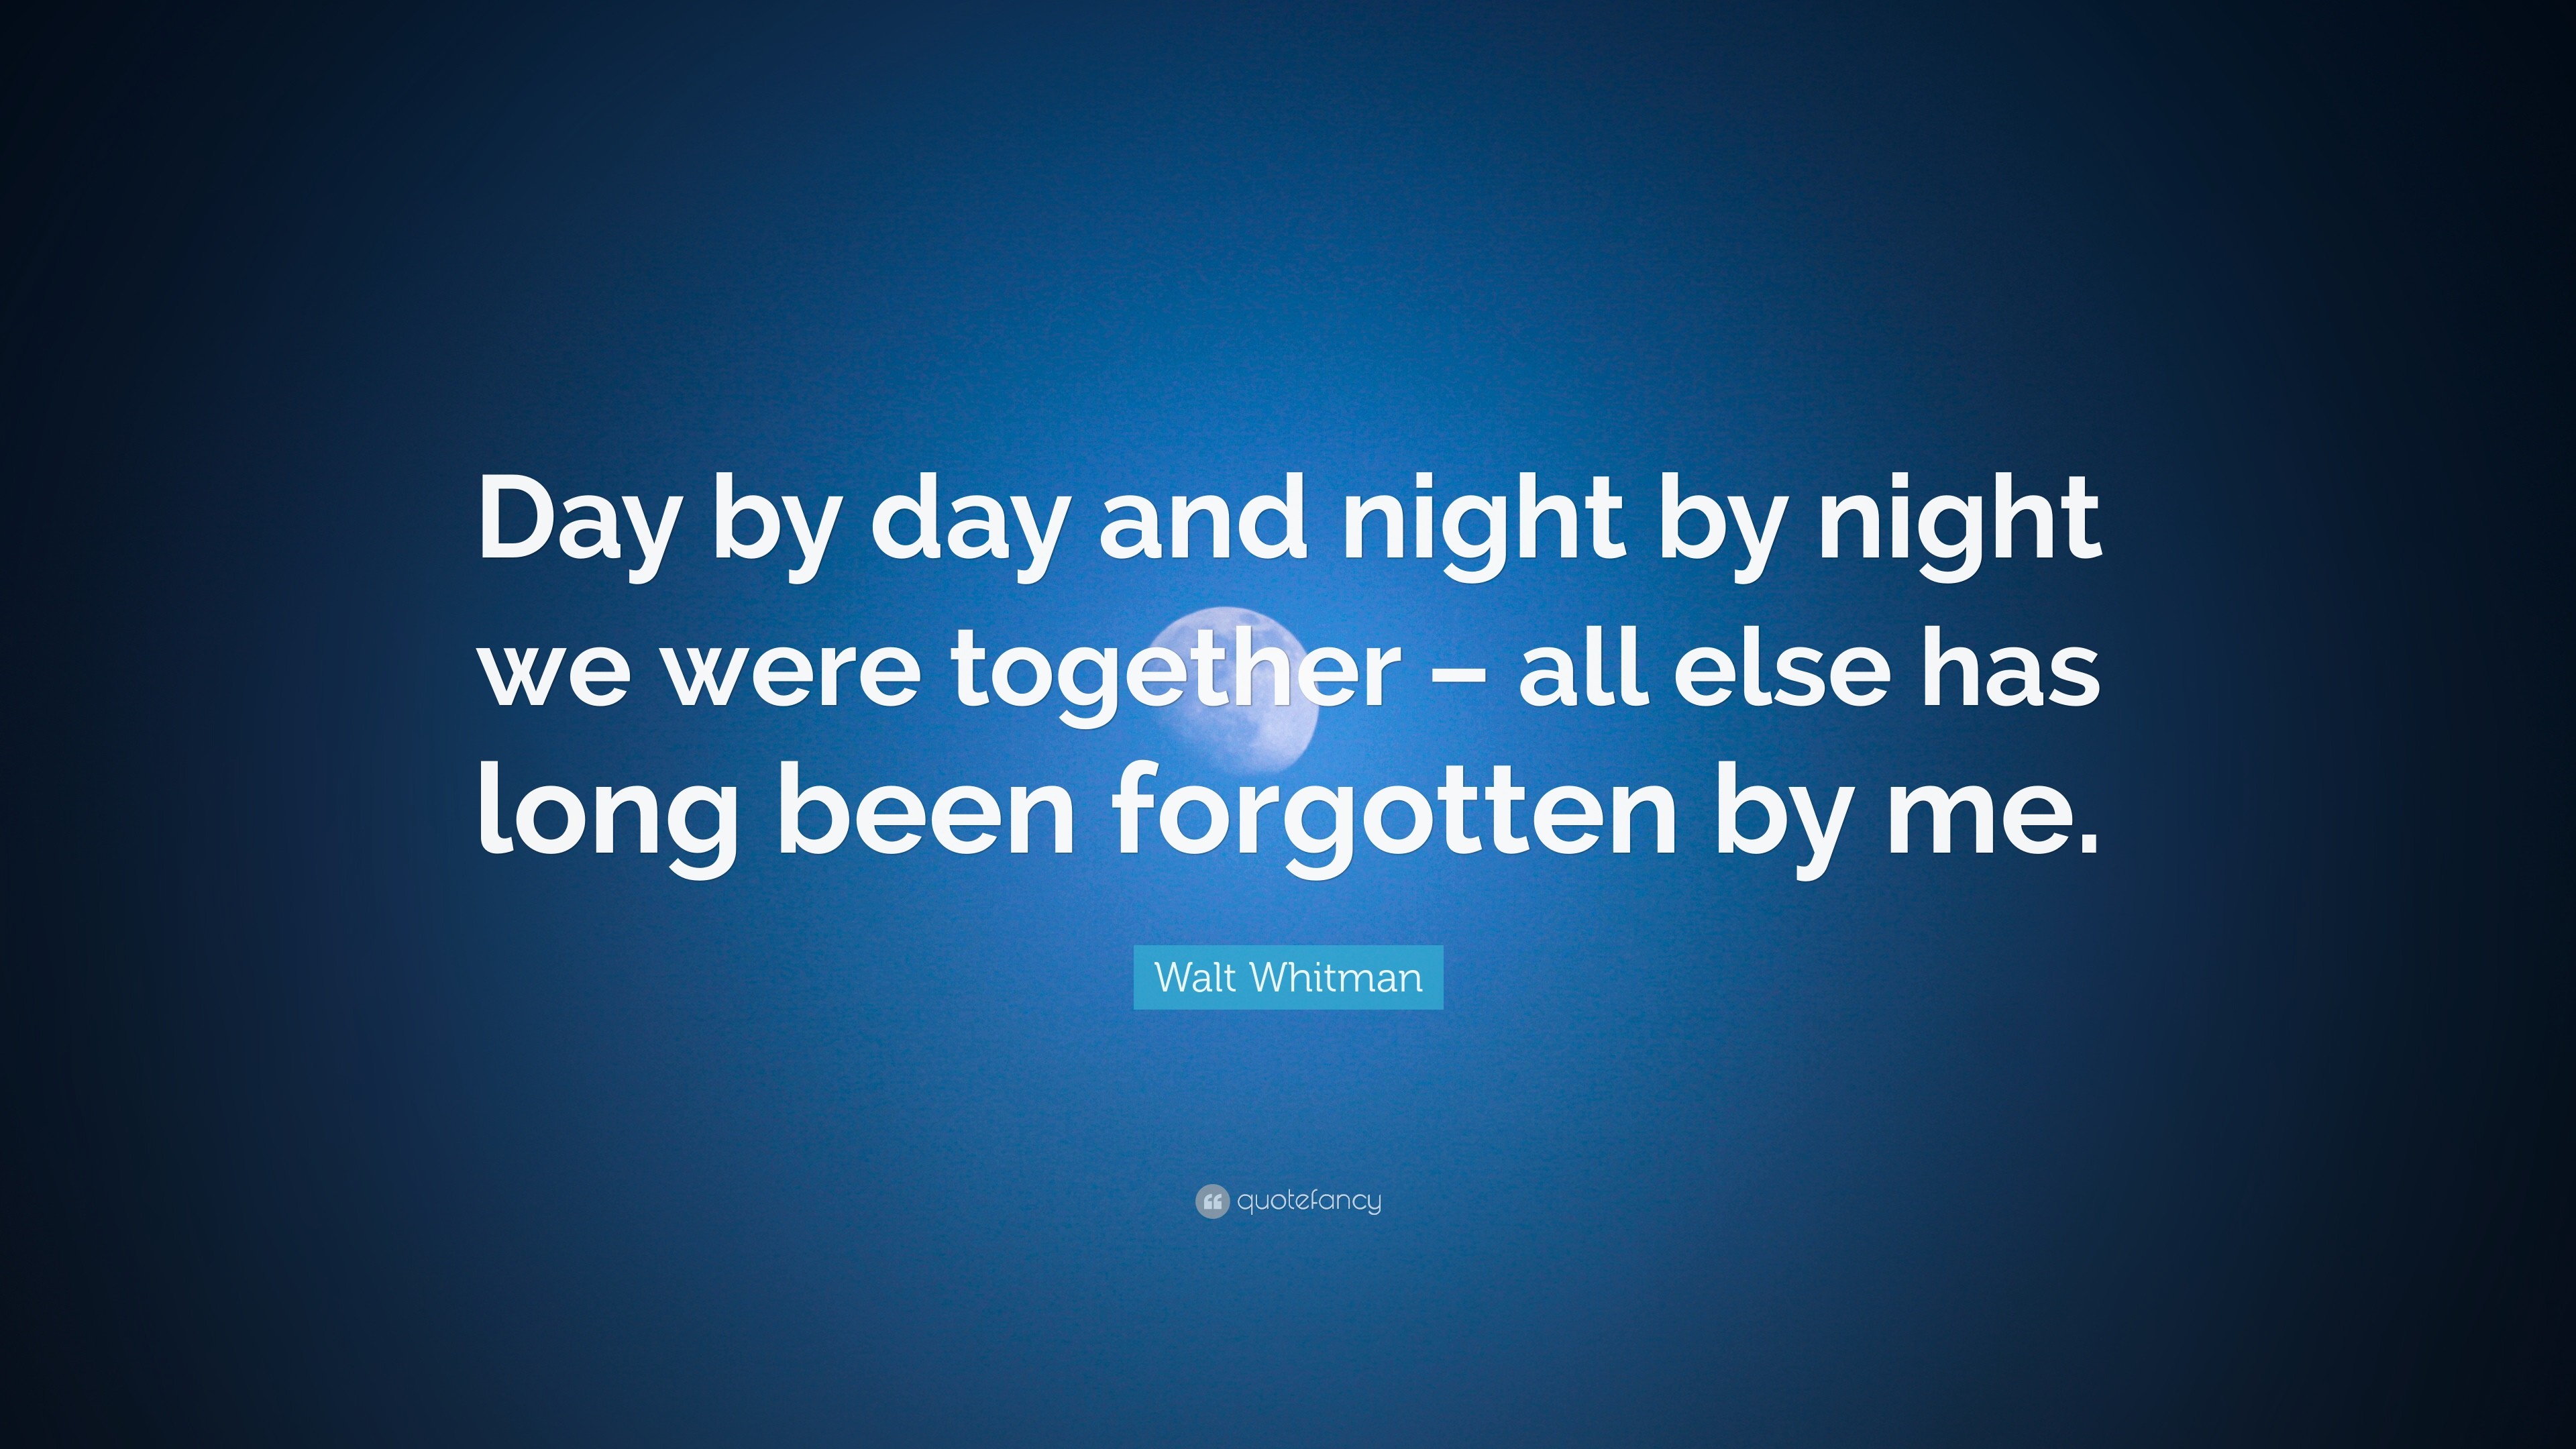 3840x2160 Walt Whitman Quote: “Day by day and night by night we were together –